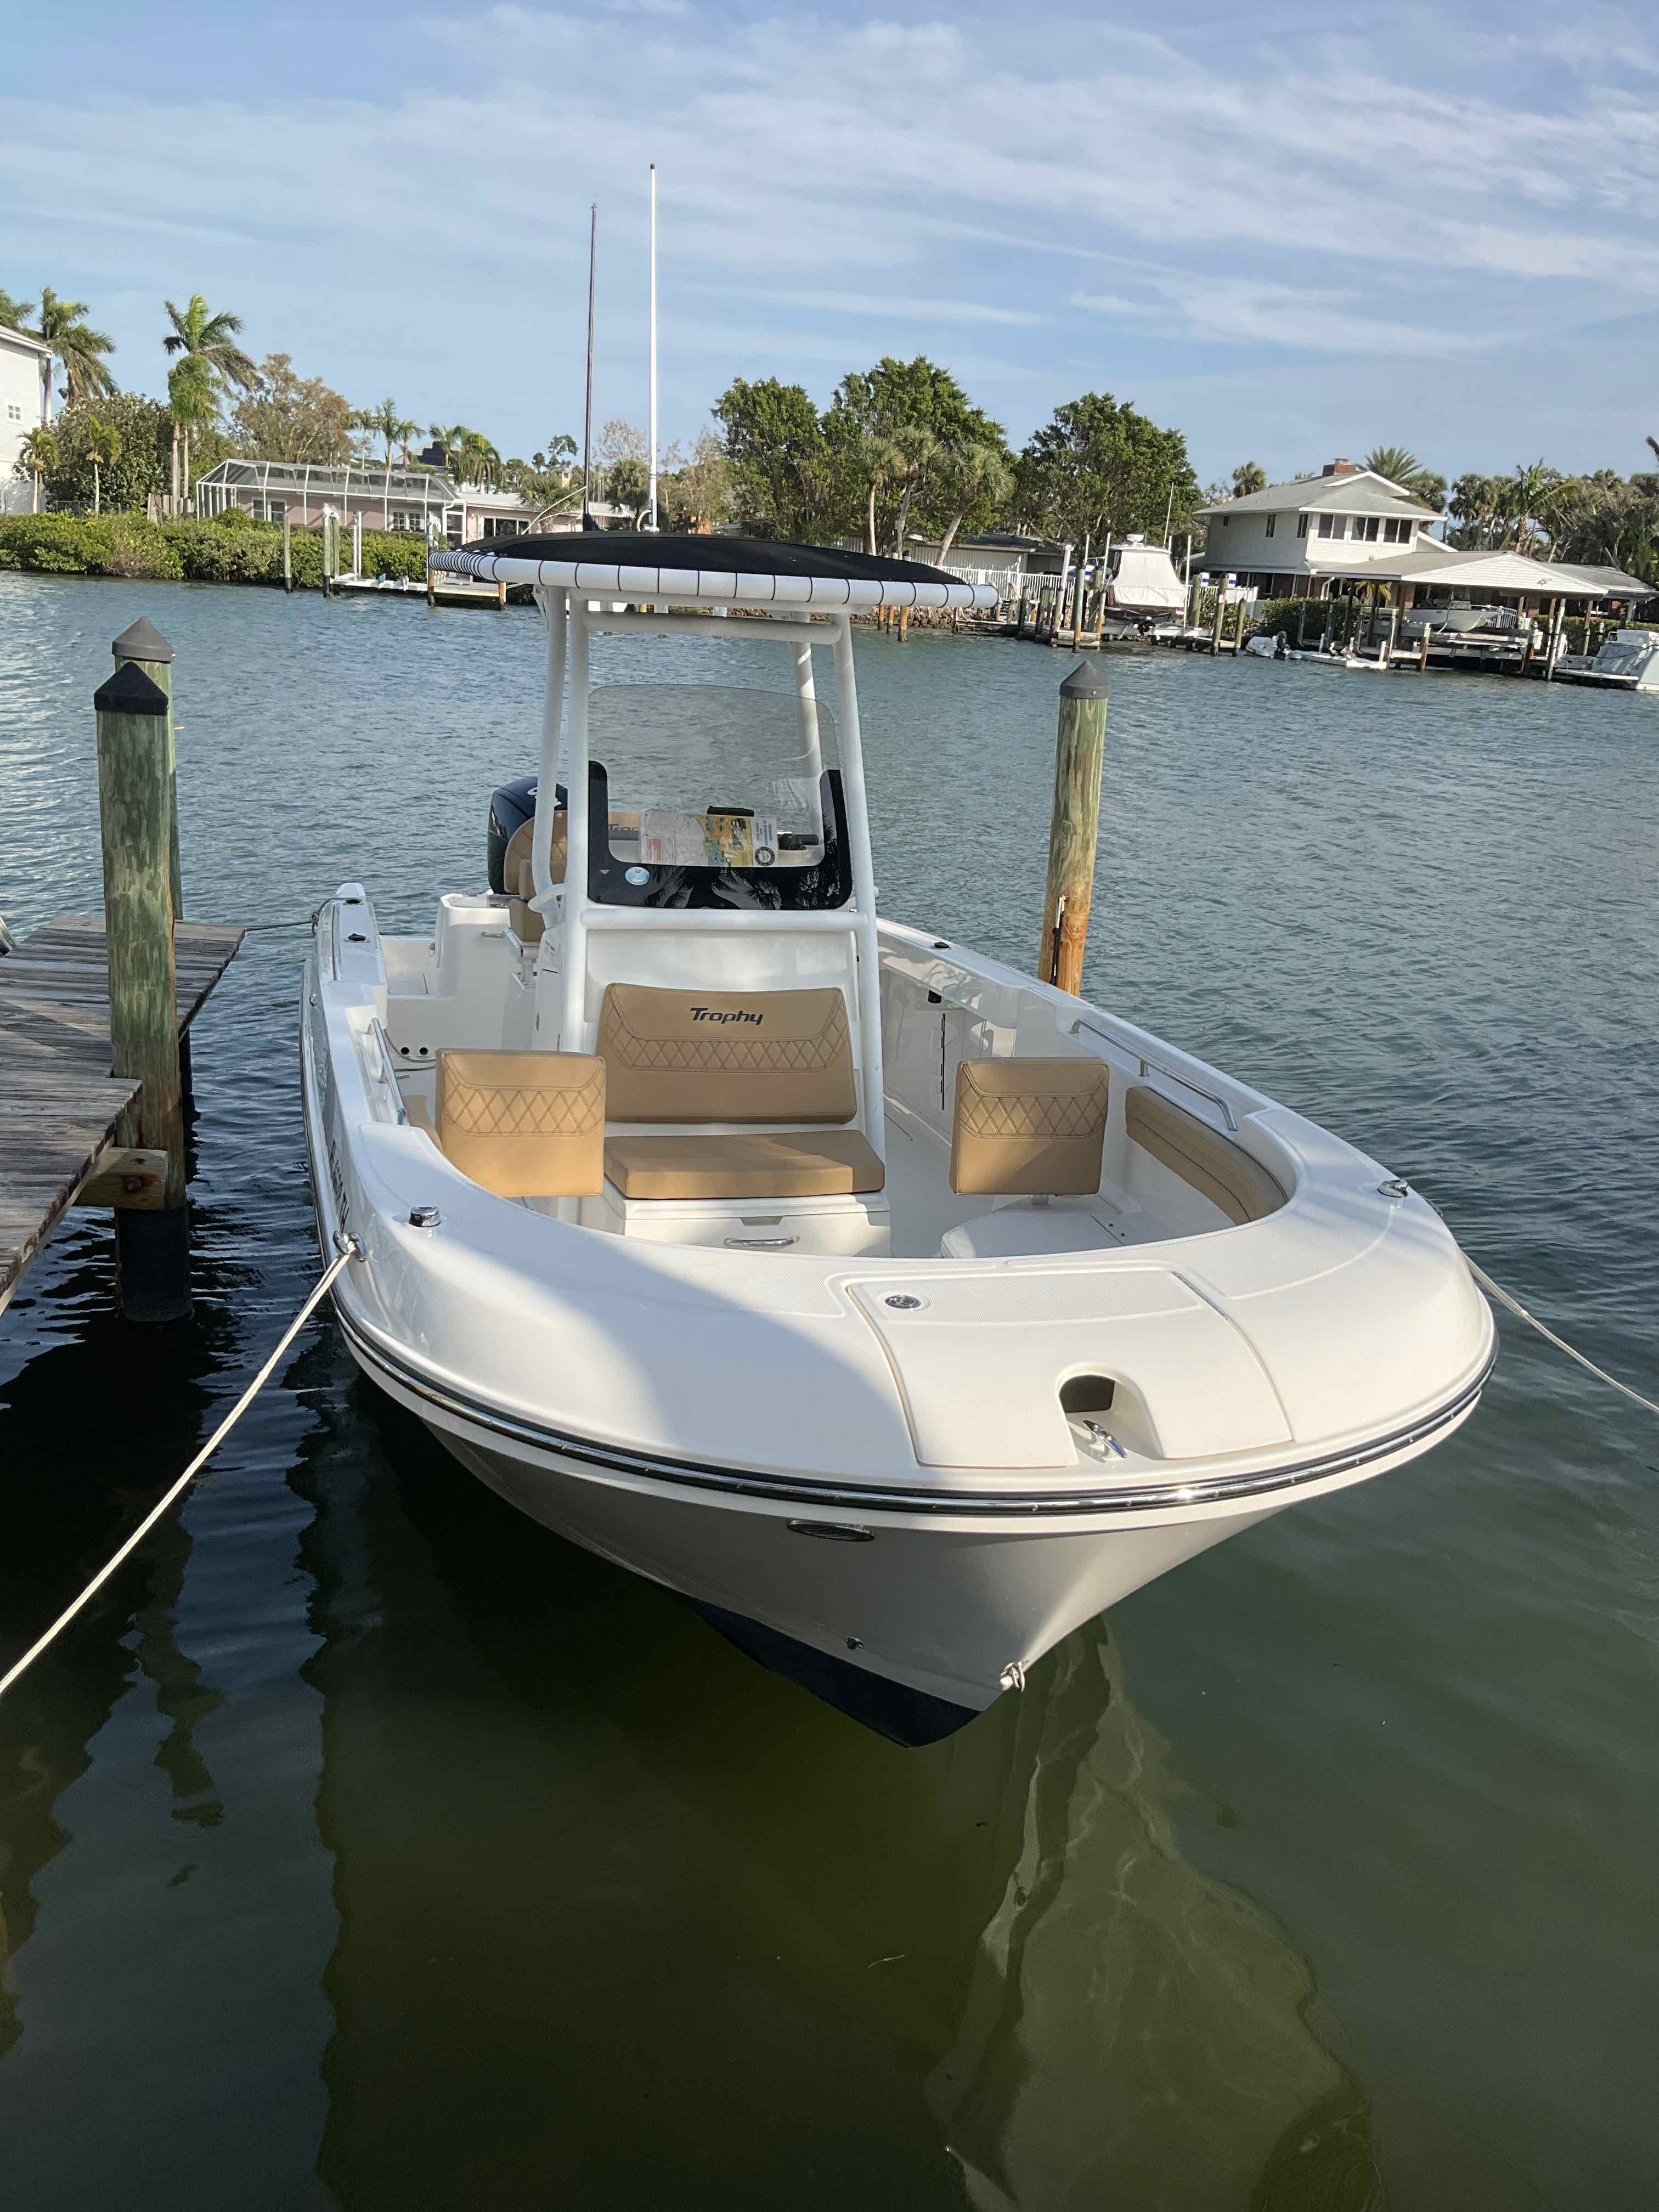 SUMMER ICE (24FT Offshore Bayliner Trophy Center Console - 250 HP~Fishing)